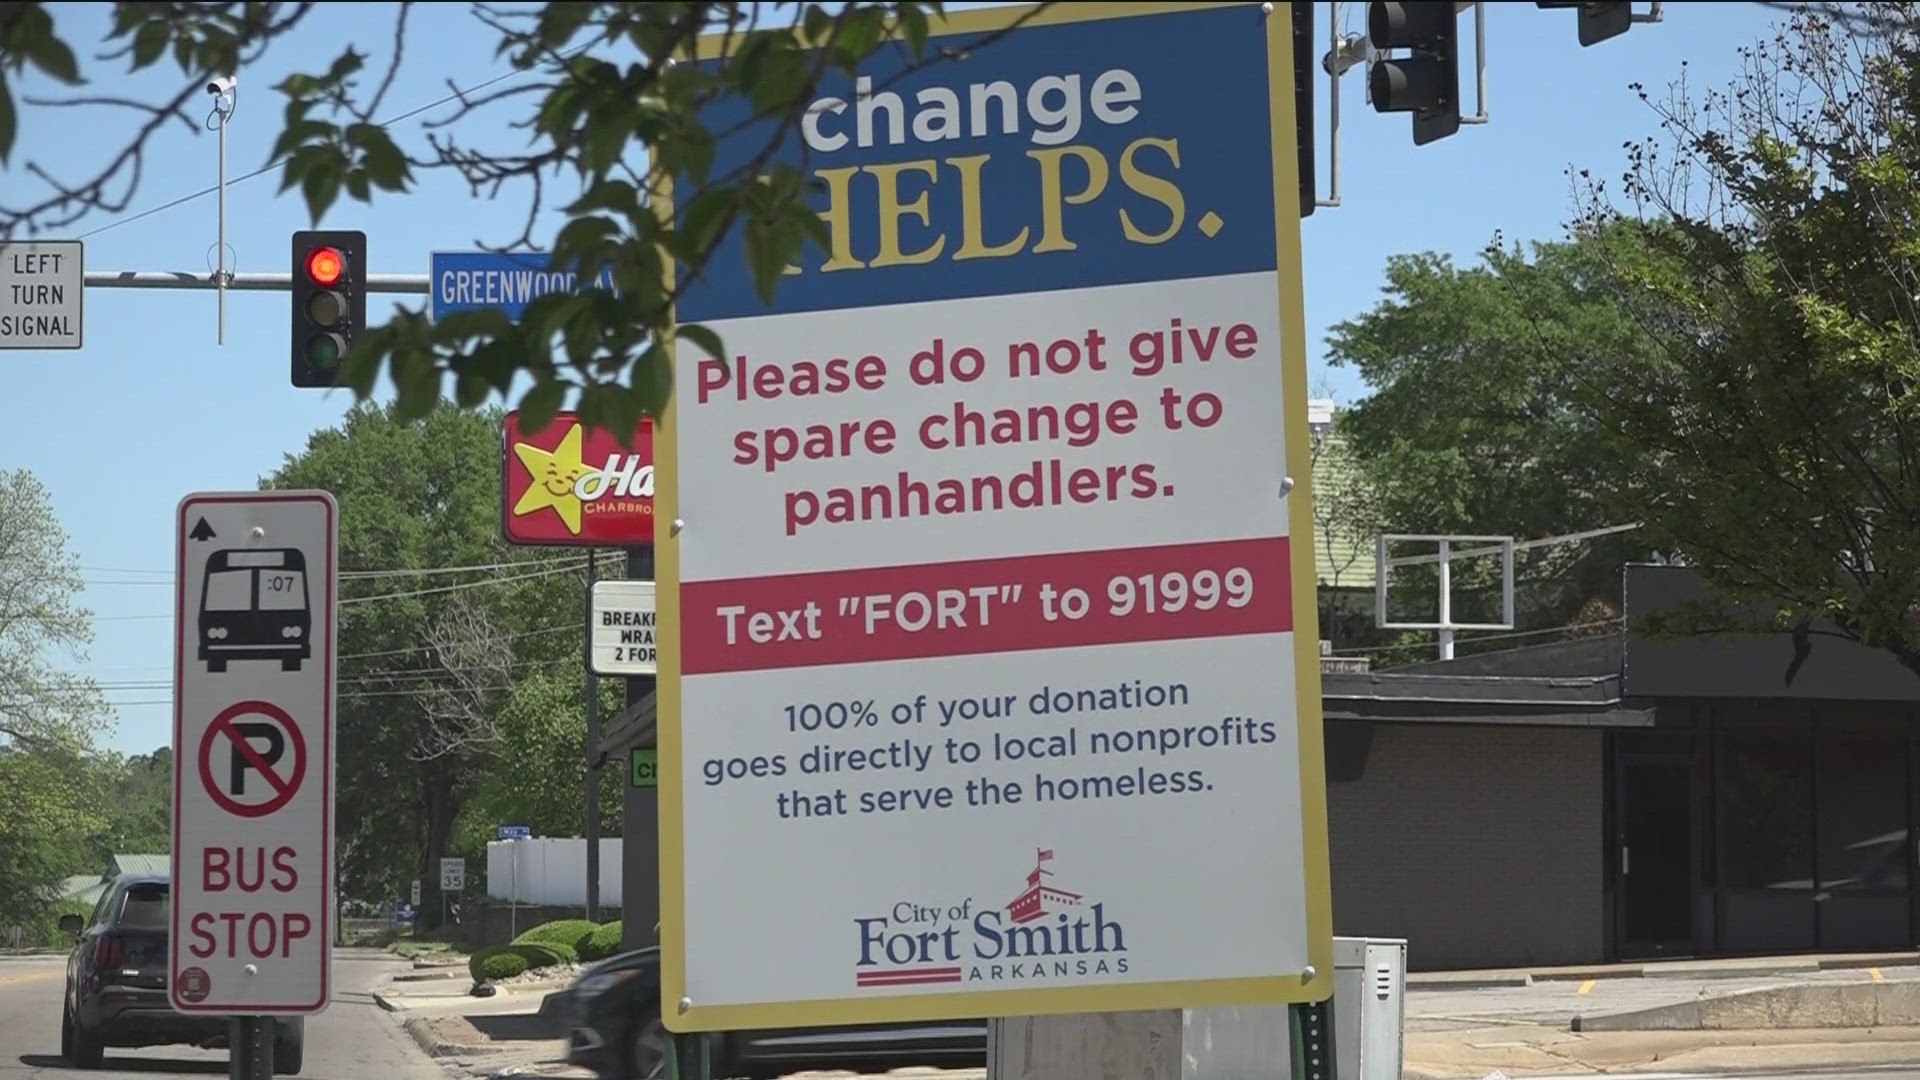 Agencies like The Salvation Army, Community Rescue Mission, Hope Campus, and Next Step Homeless Services have partnered with Fort Smith's "Change Helps" program.